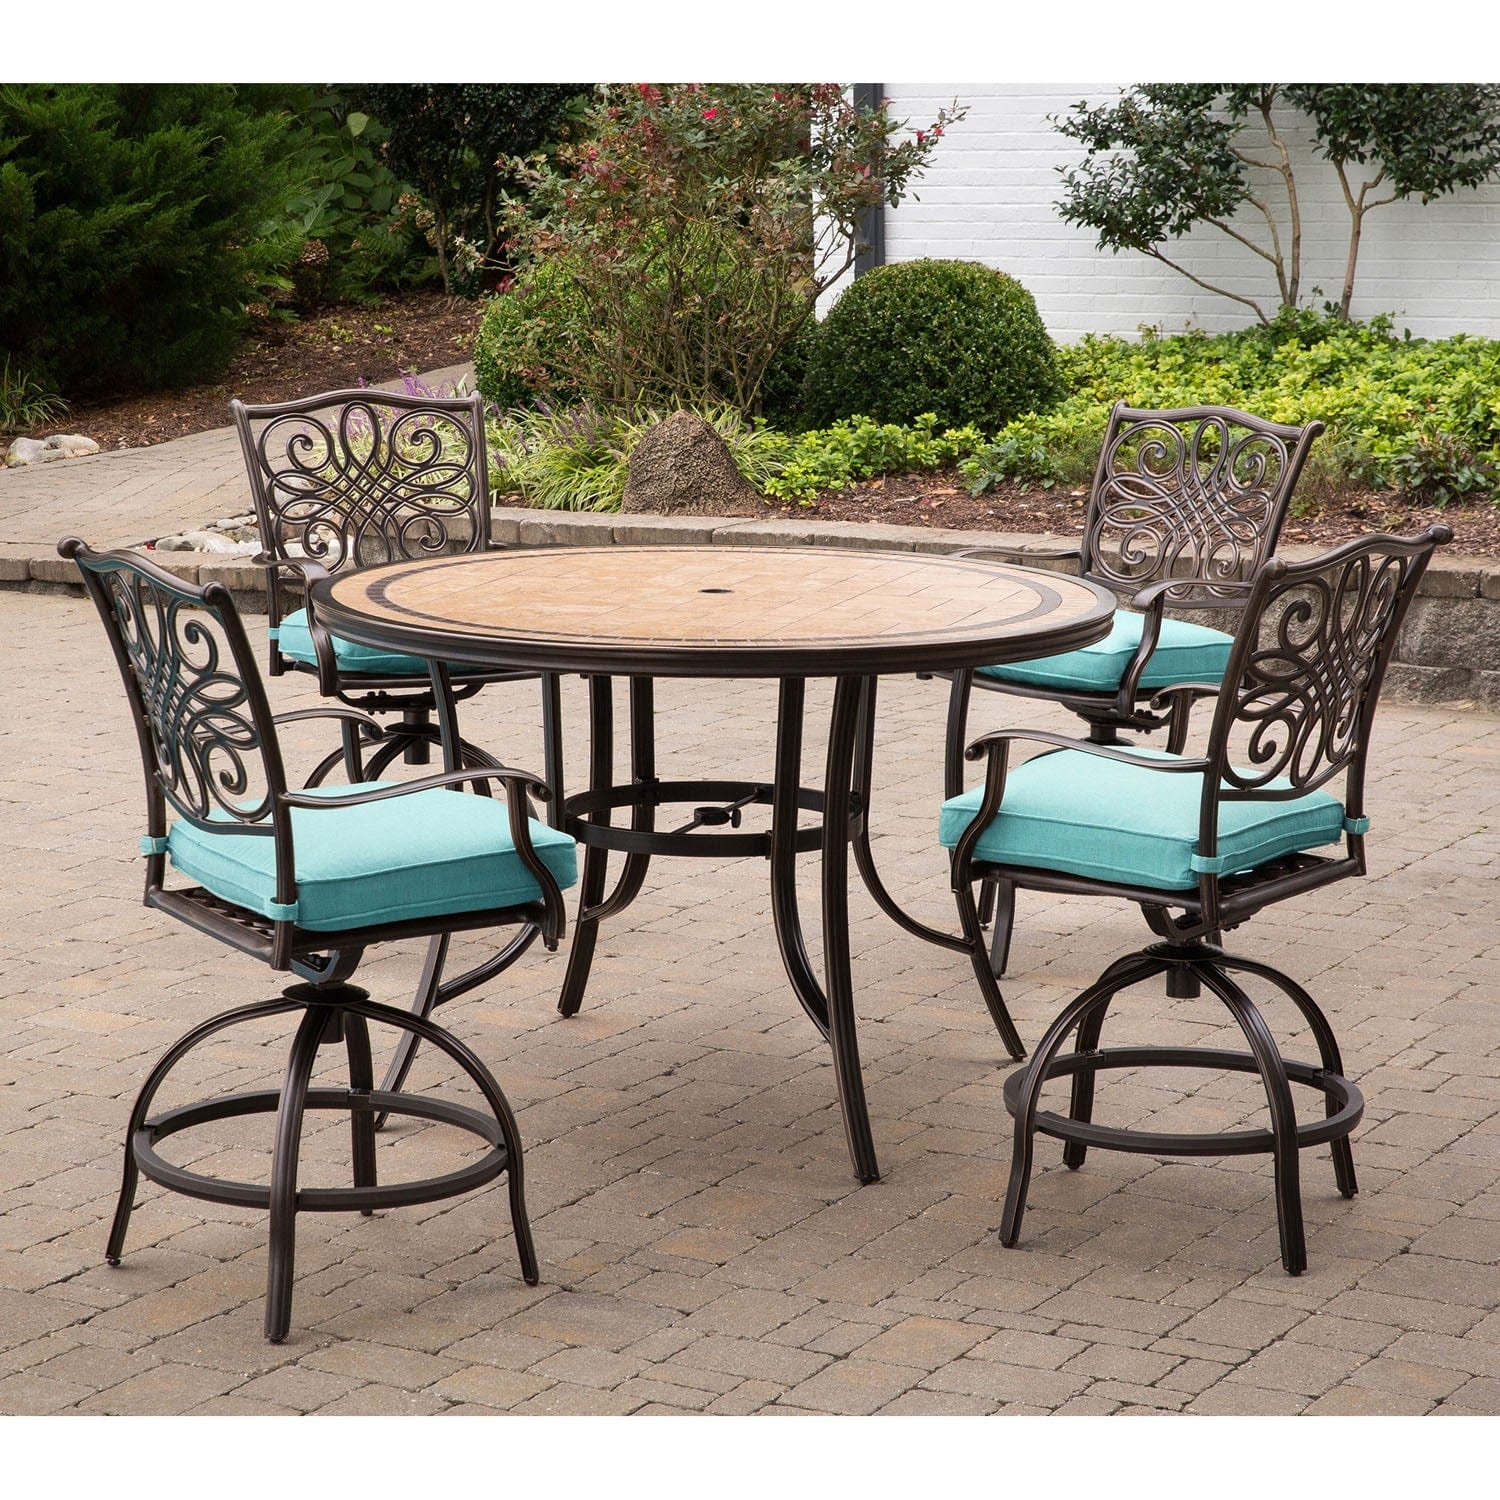 Hanover Outdoor Dining Set Hanover Monaco 5-Piece High-Dining Set in Blue with 4 Swivel Chairs and a 56 In. Tile-top Table | MONDN5PCBR-C-BLU